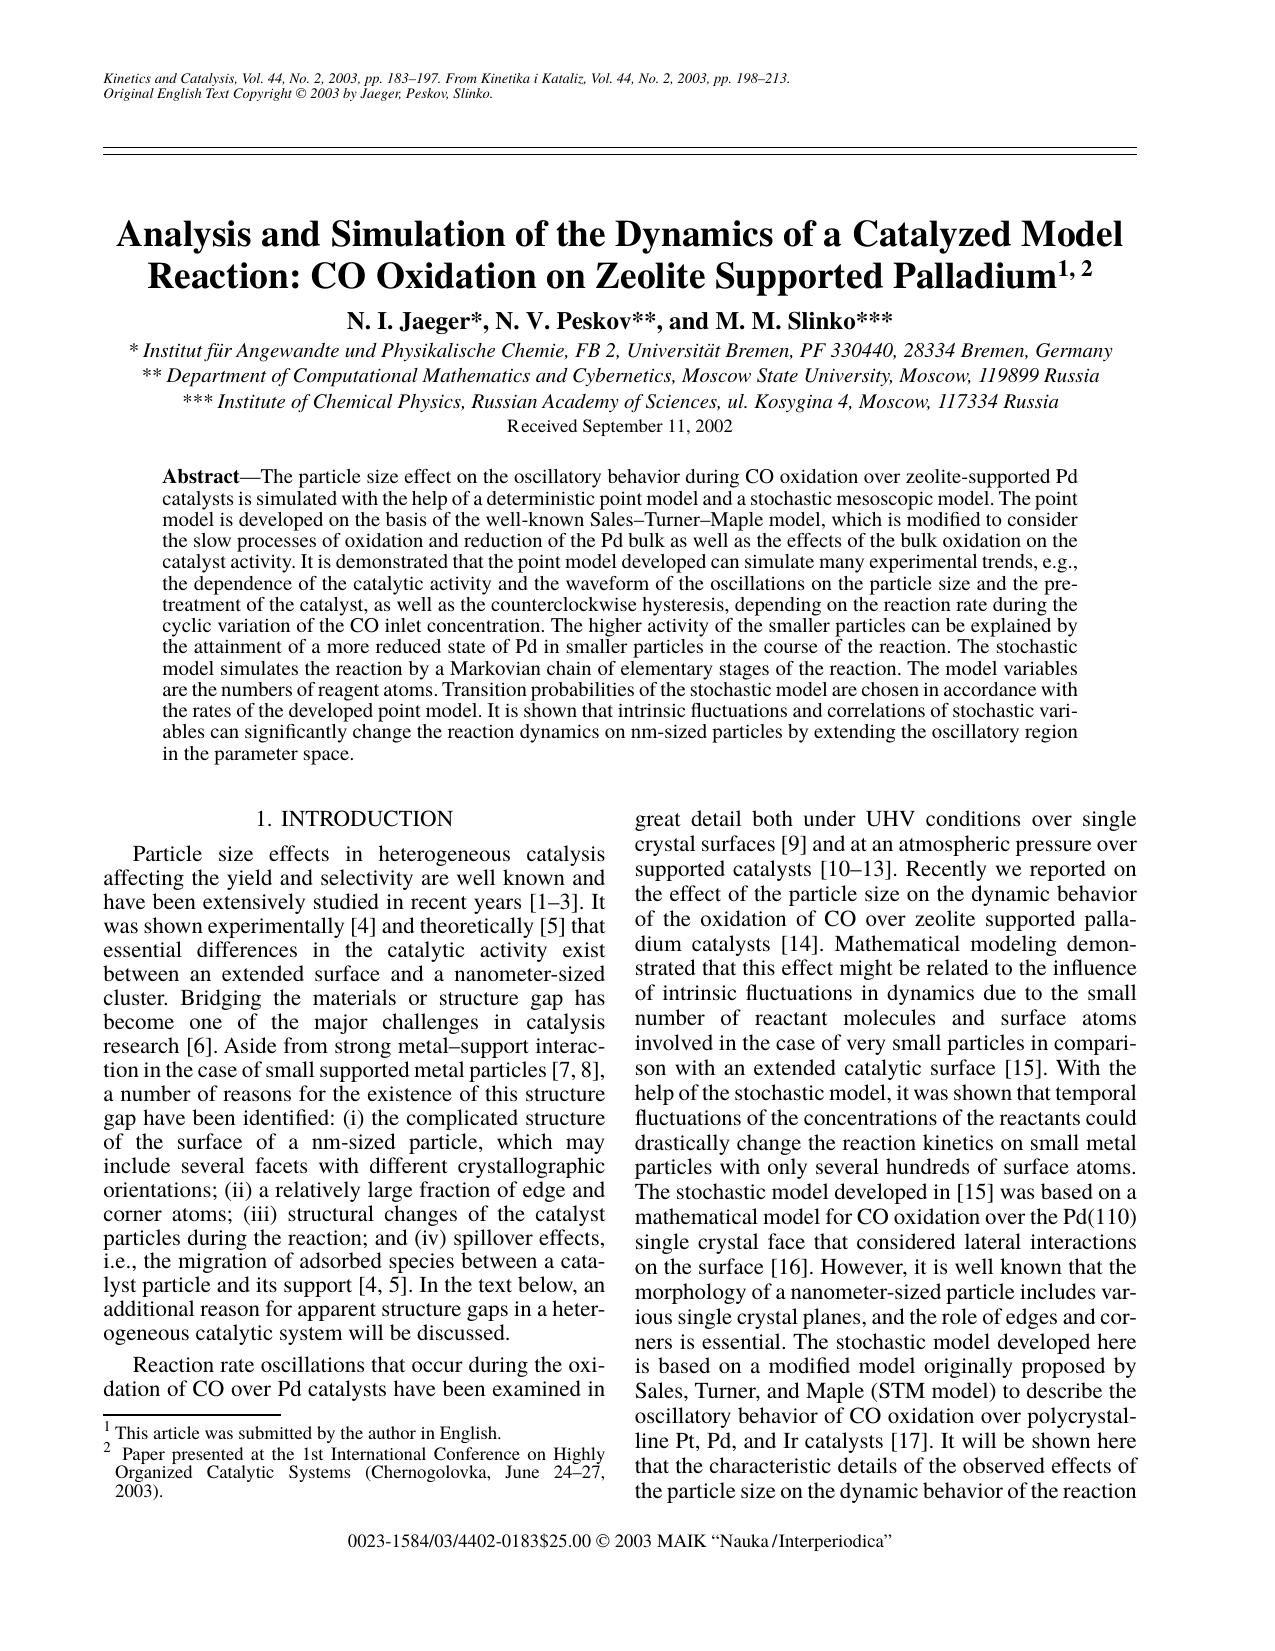 Analysis and Simulation of the Dynamics of a Catalyzed Model Reaction: CO Oxidation on Zeolite Supported Palladium by Unknown